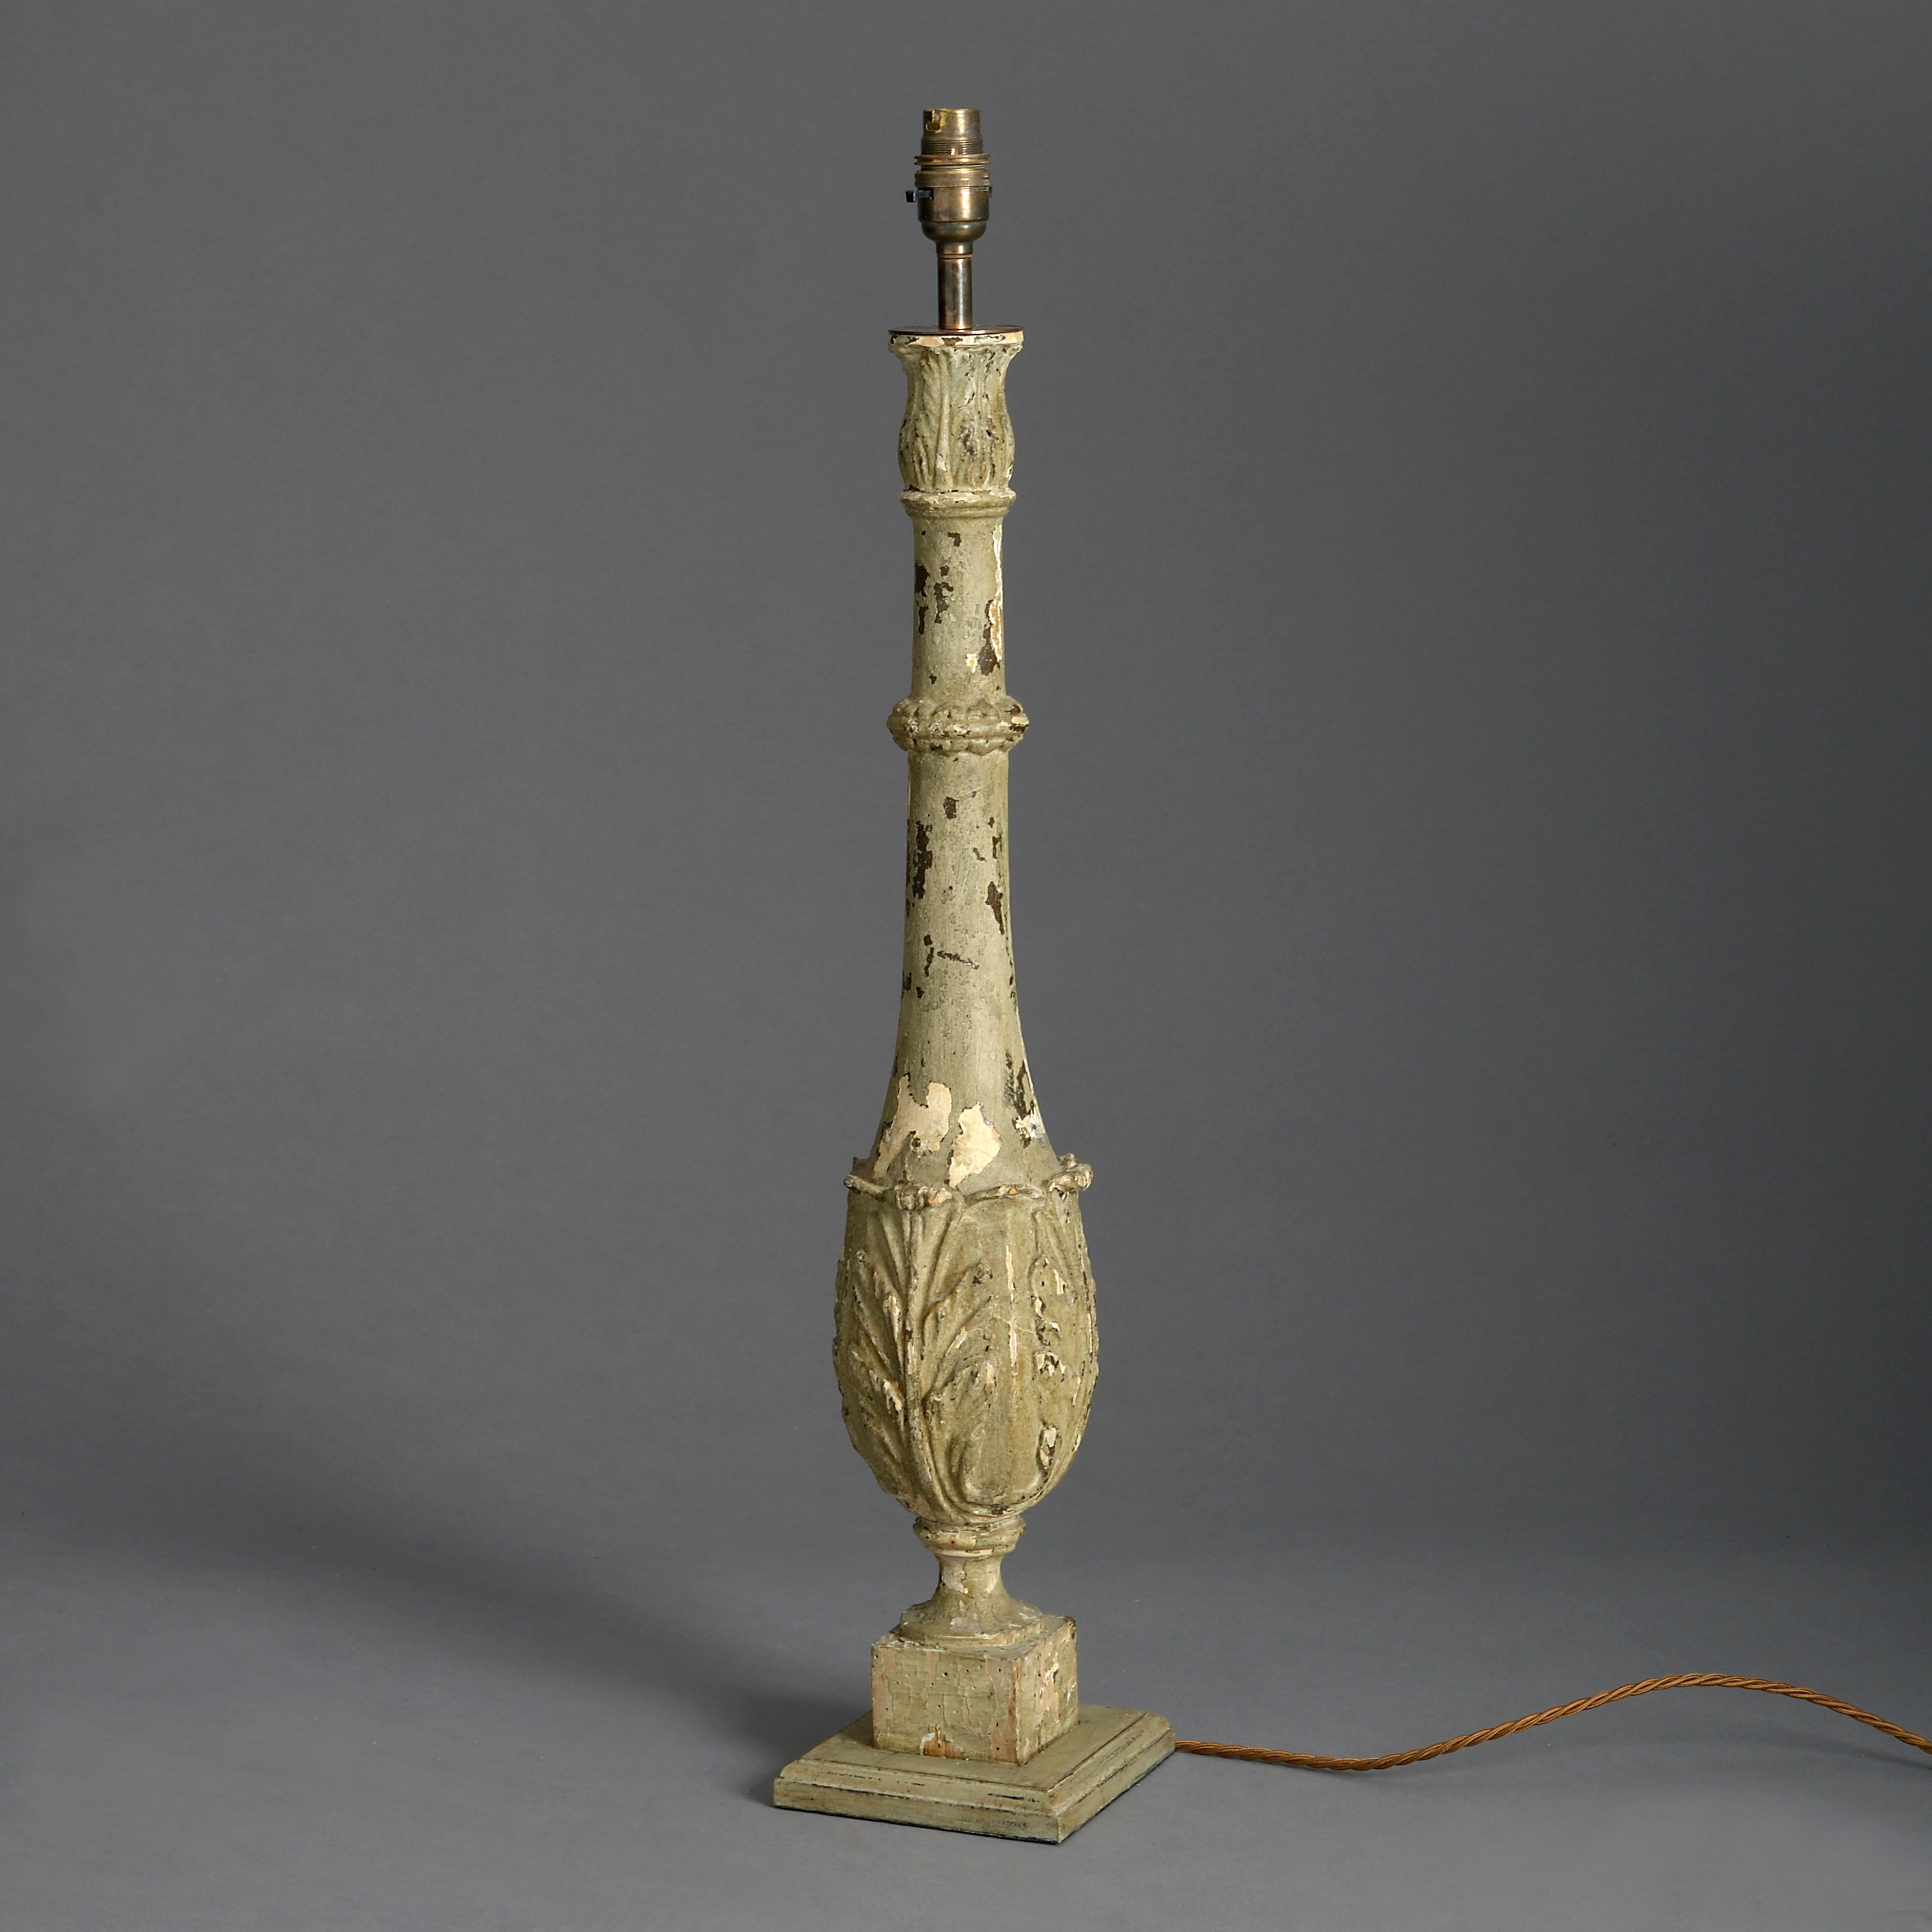 A pair of late 19th century carved and painted balustrades, the stems with acanthus carving and supported upon plinth bases.

Now wired as table lamps.

Shades available to purchase separately